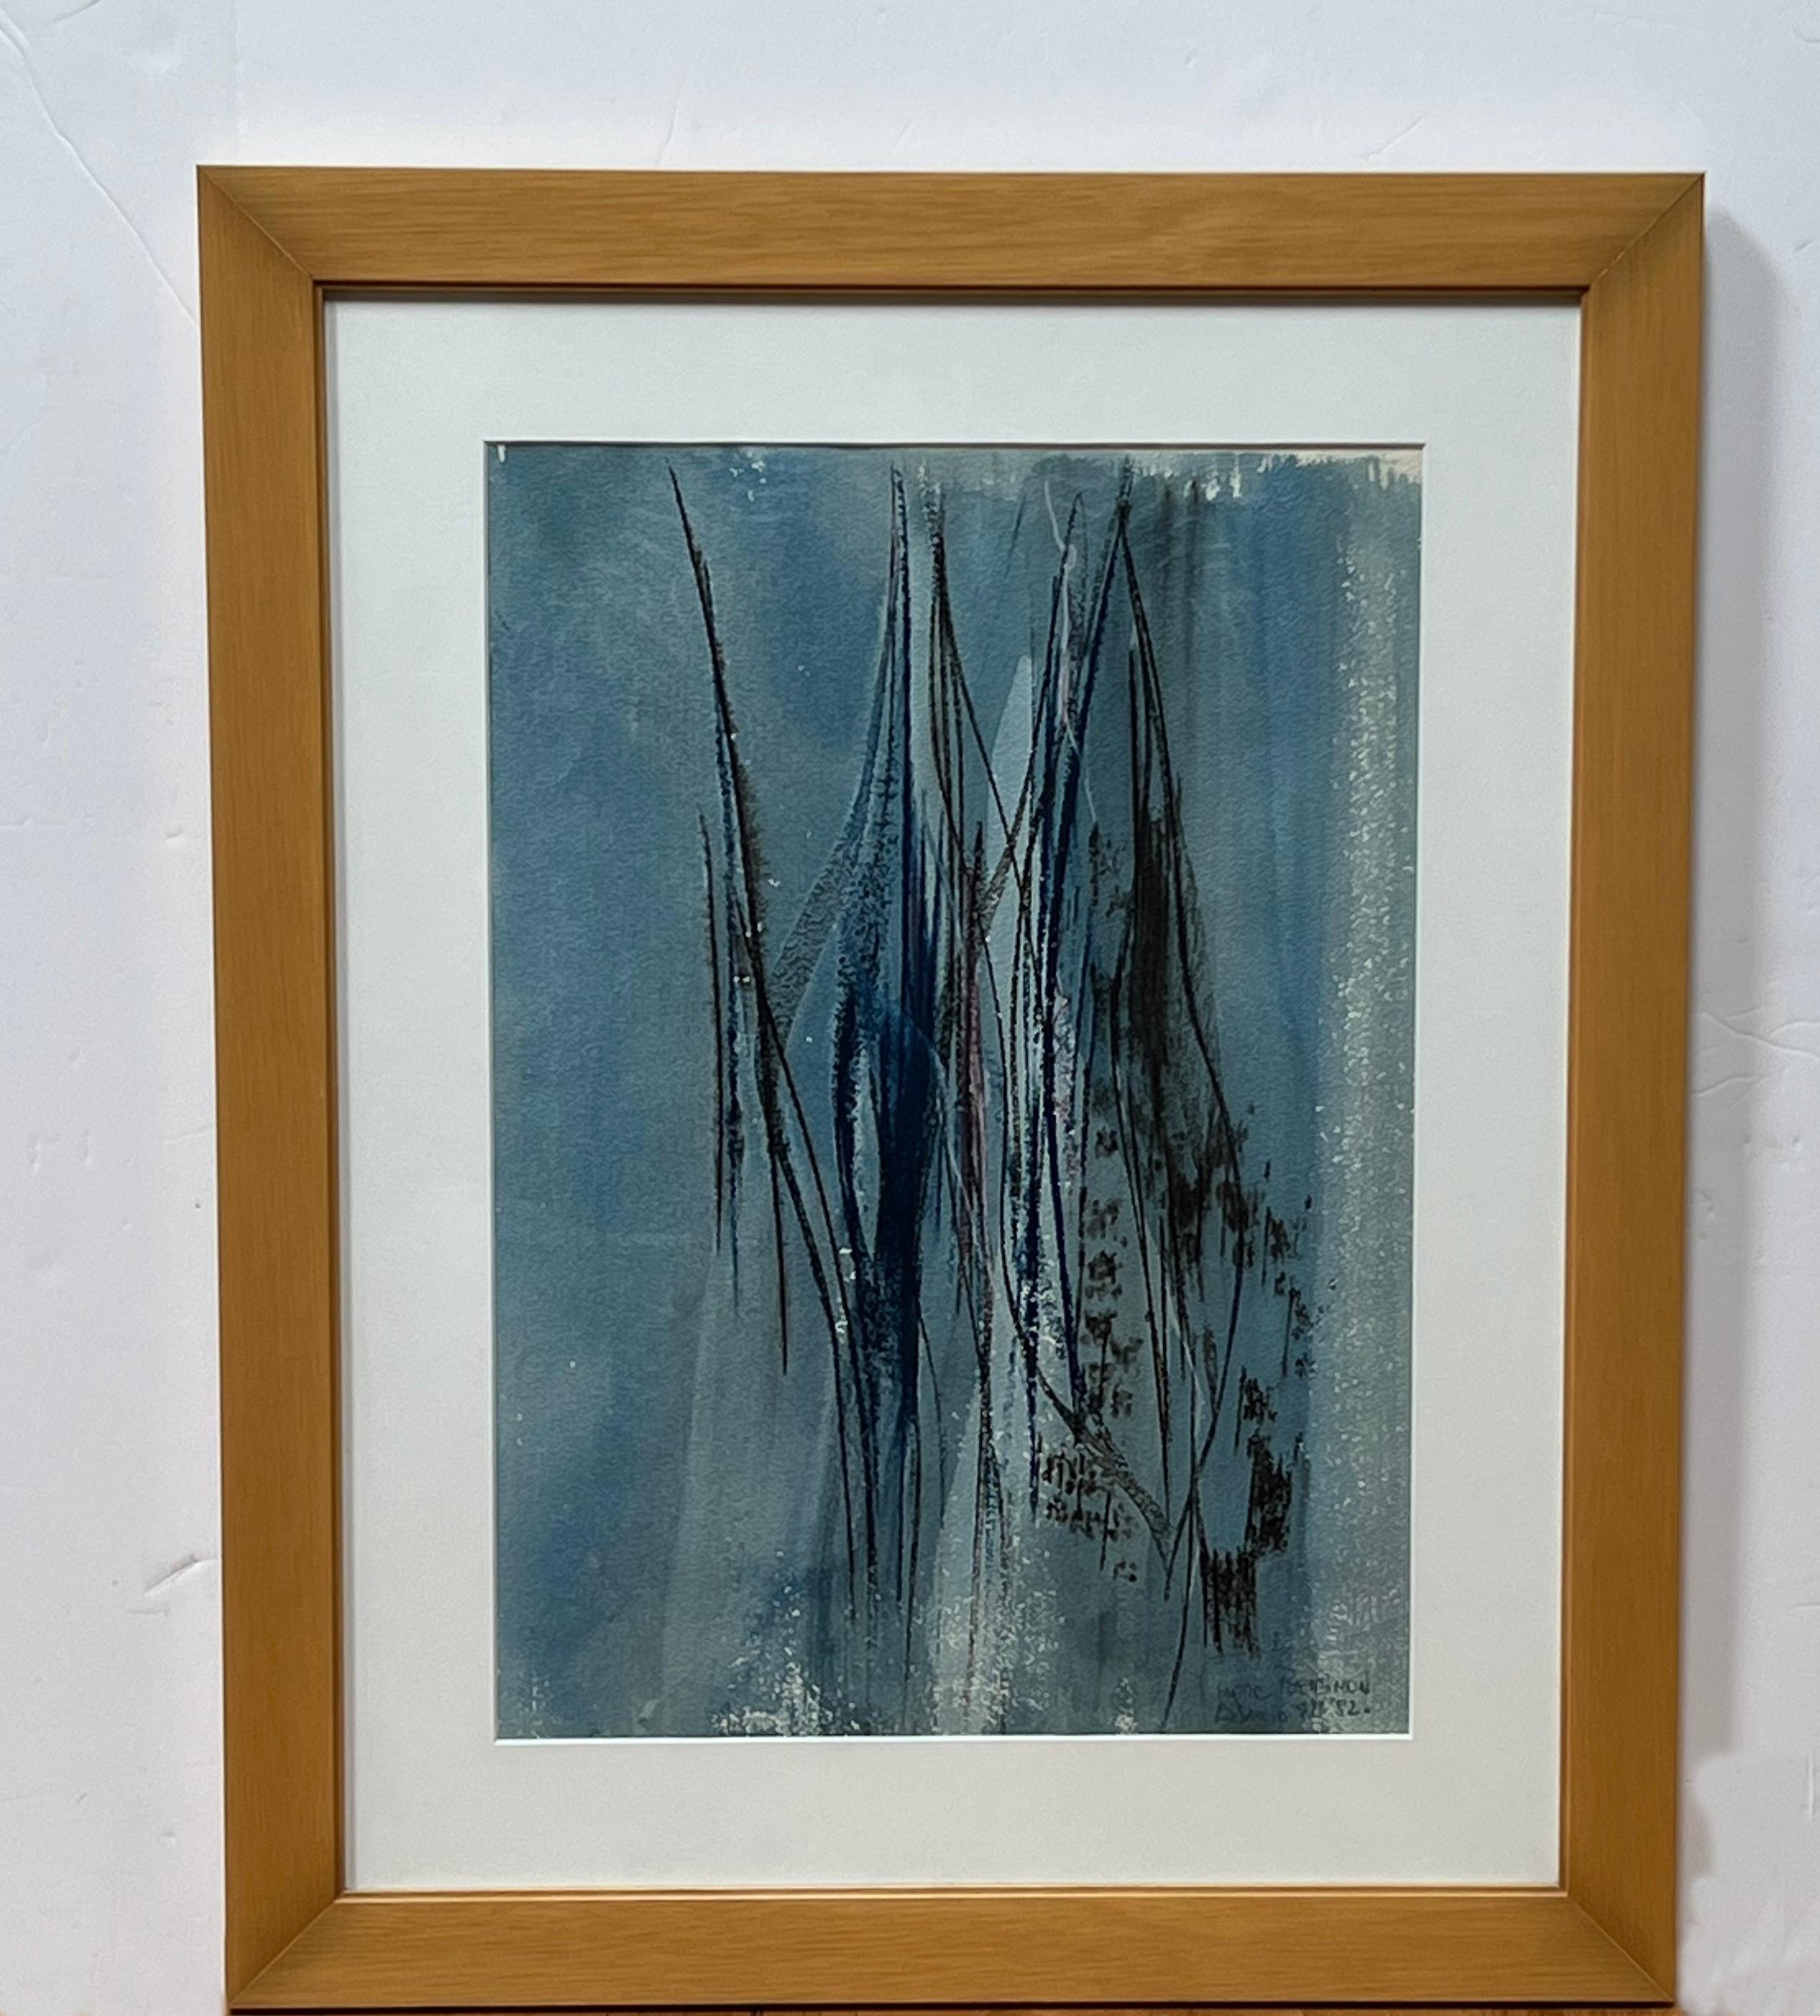 This abstract watercolor by the American artist Marc Bensimon (1926-) features vertical lines of blues sliding down the canvas like raindrops on a window.
It is signed in blue pencil "Marc Benimon Los Angeles '82" in the lower right part of the